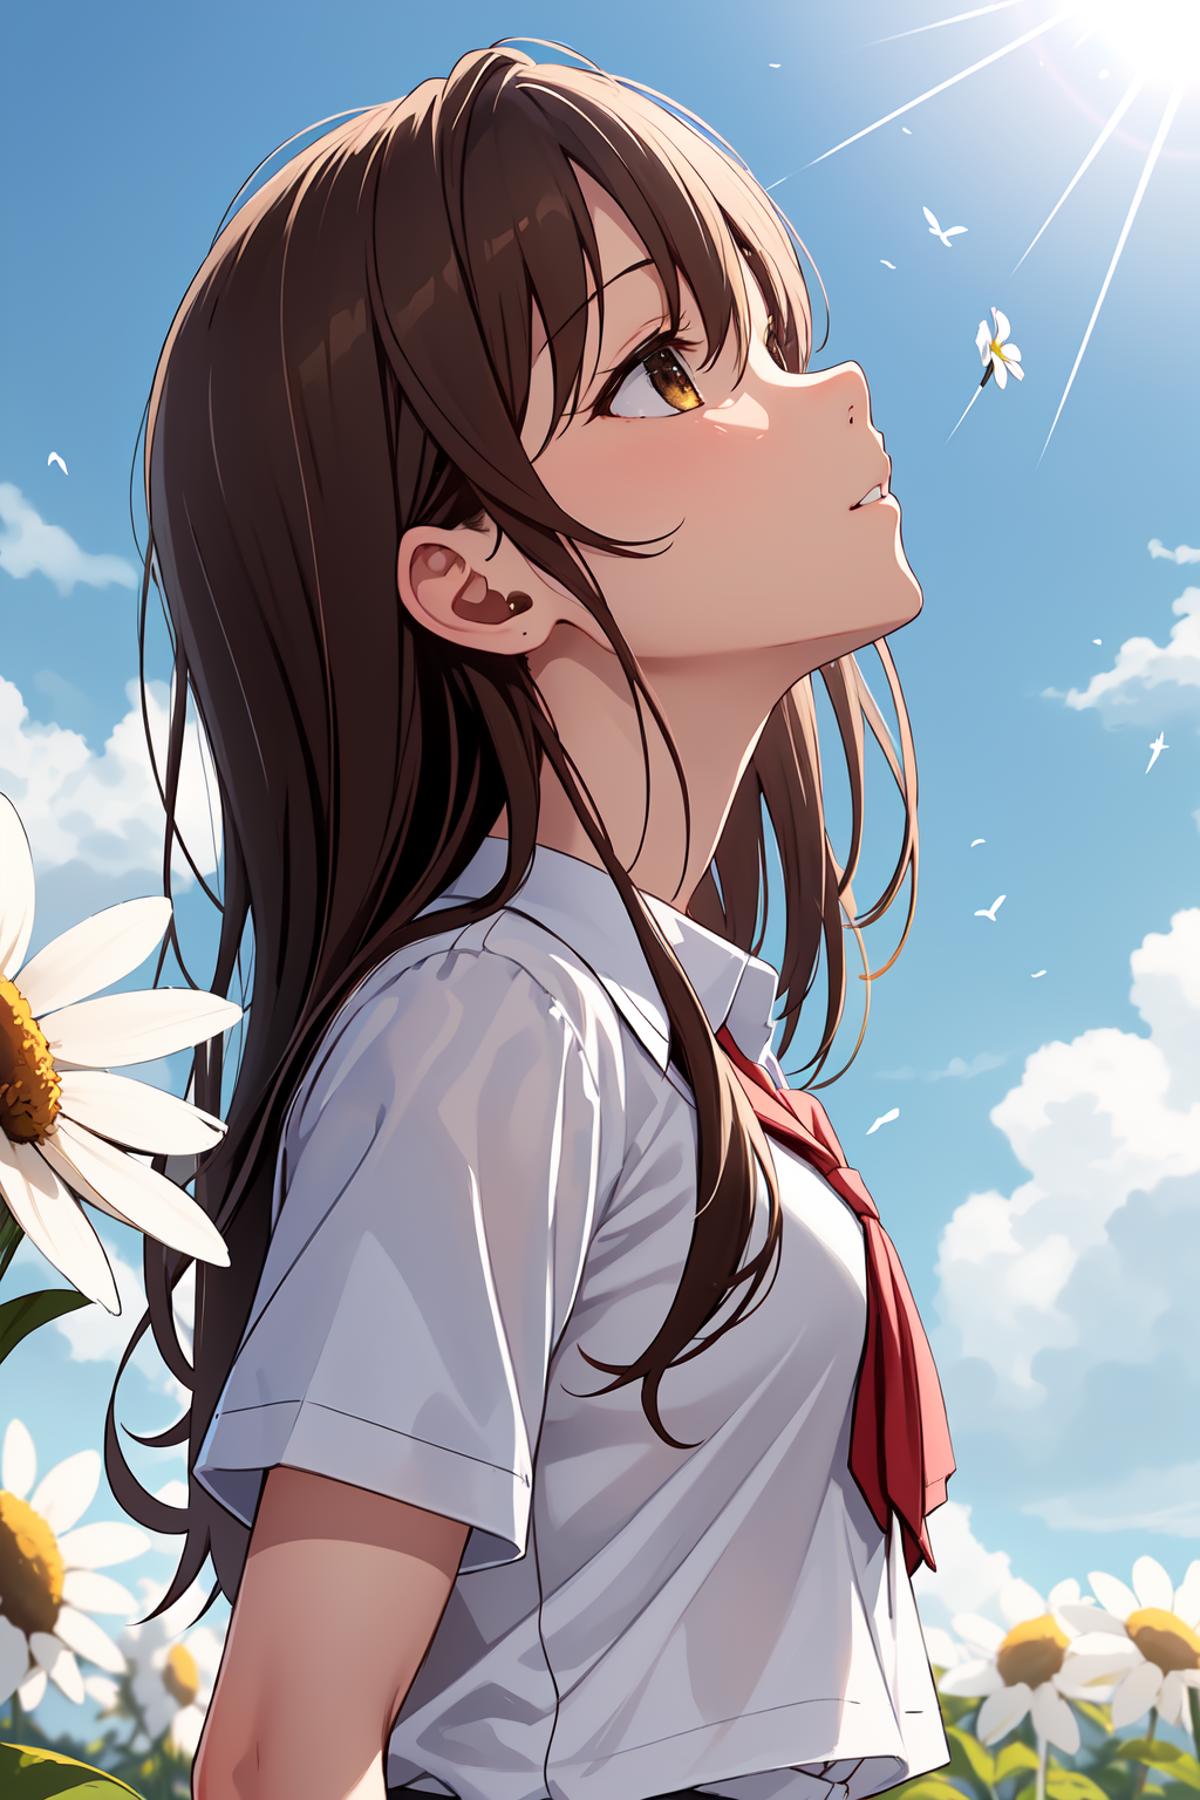 A girl with a red tie looking up at a butterfly in the sky.